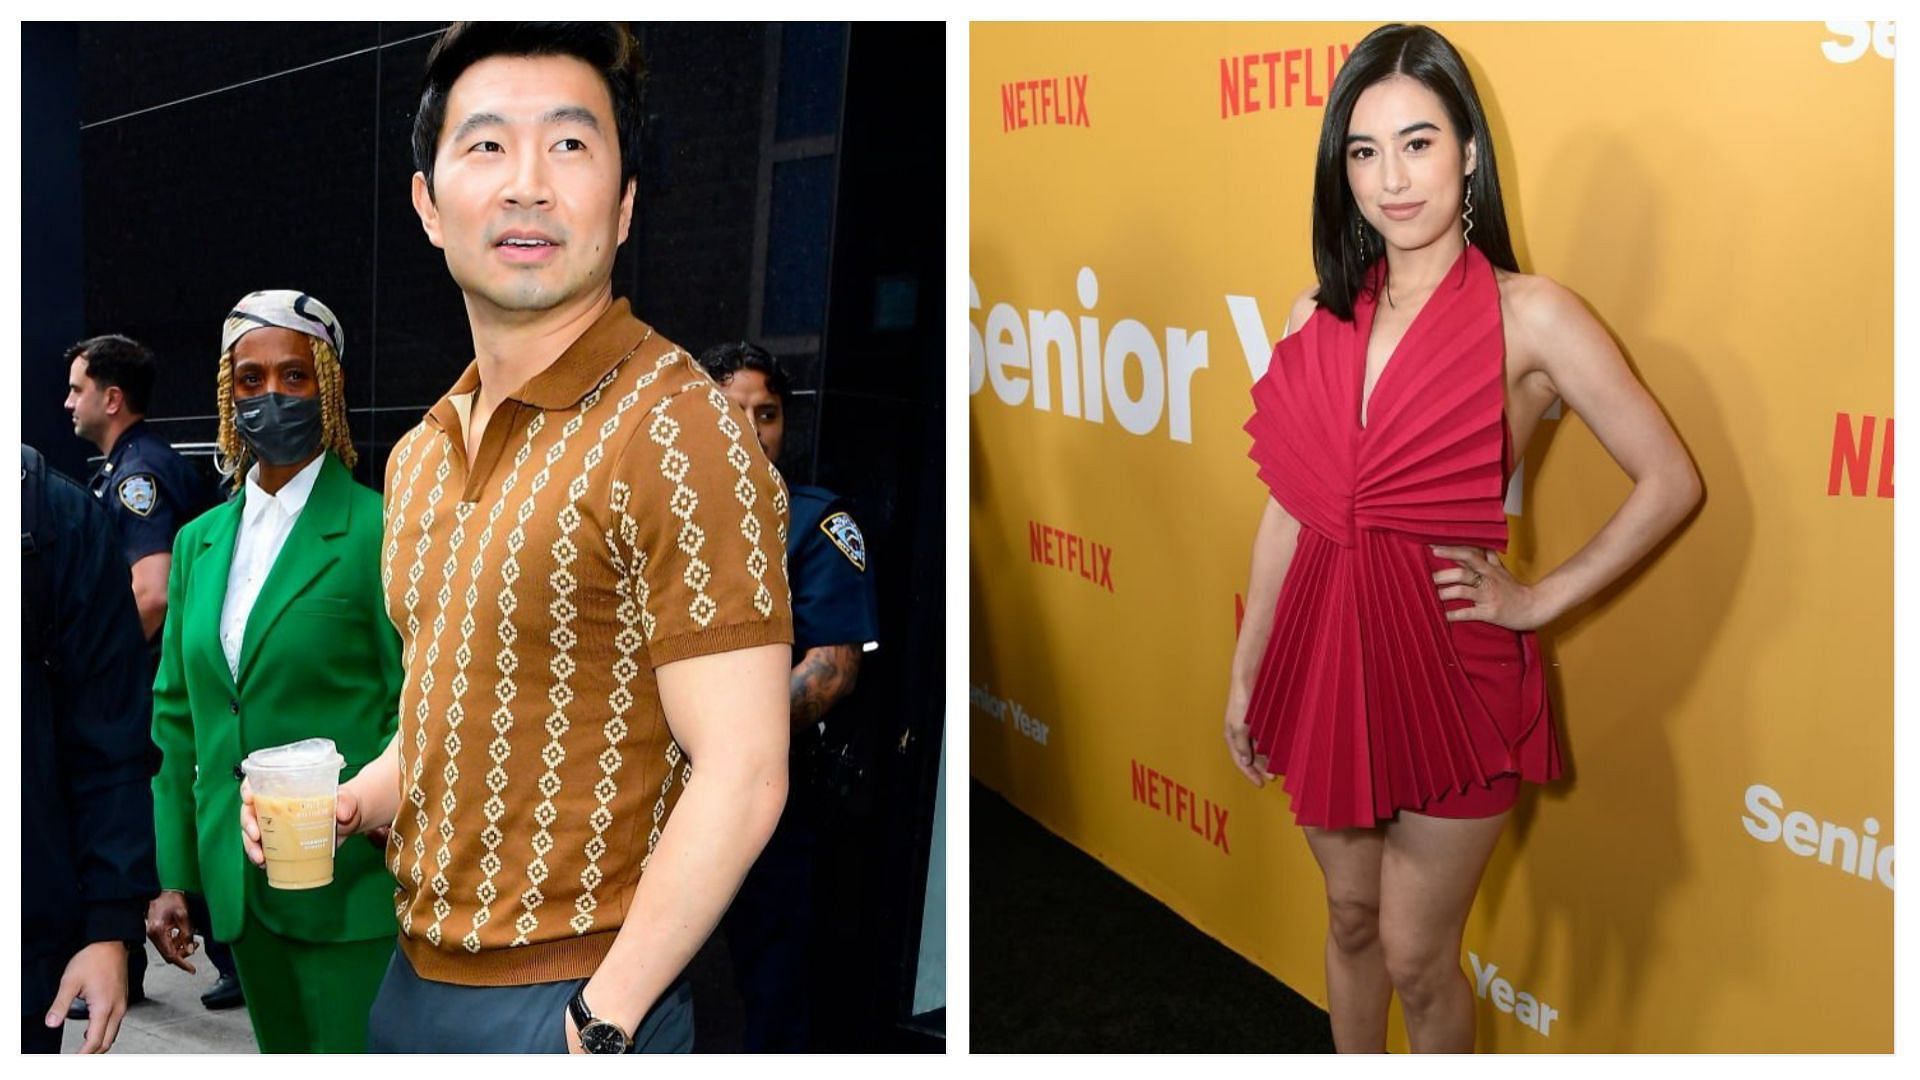 Simu Liu and Jade Bender were recently spotted together at a restaurant (Images via Raymond Hall and Vivien Killilea/Getty Images)